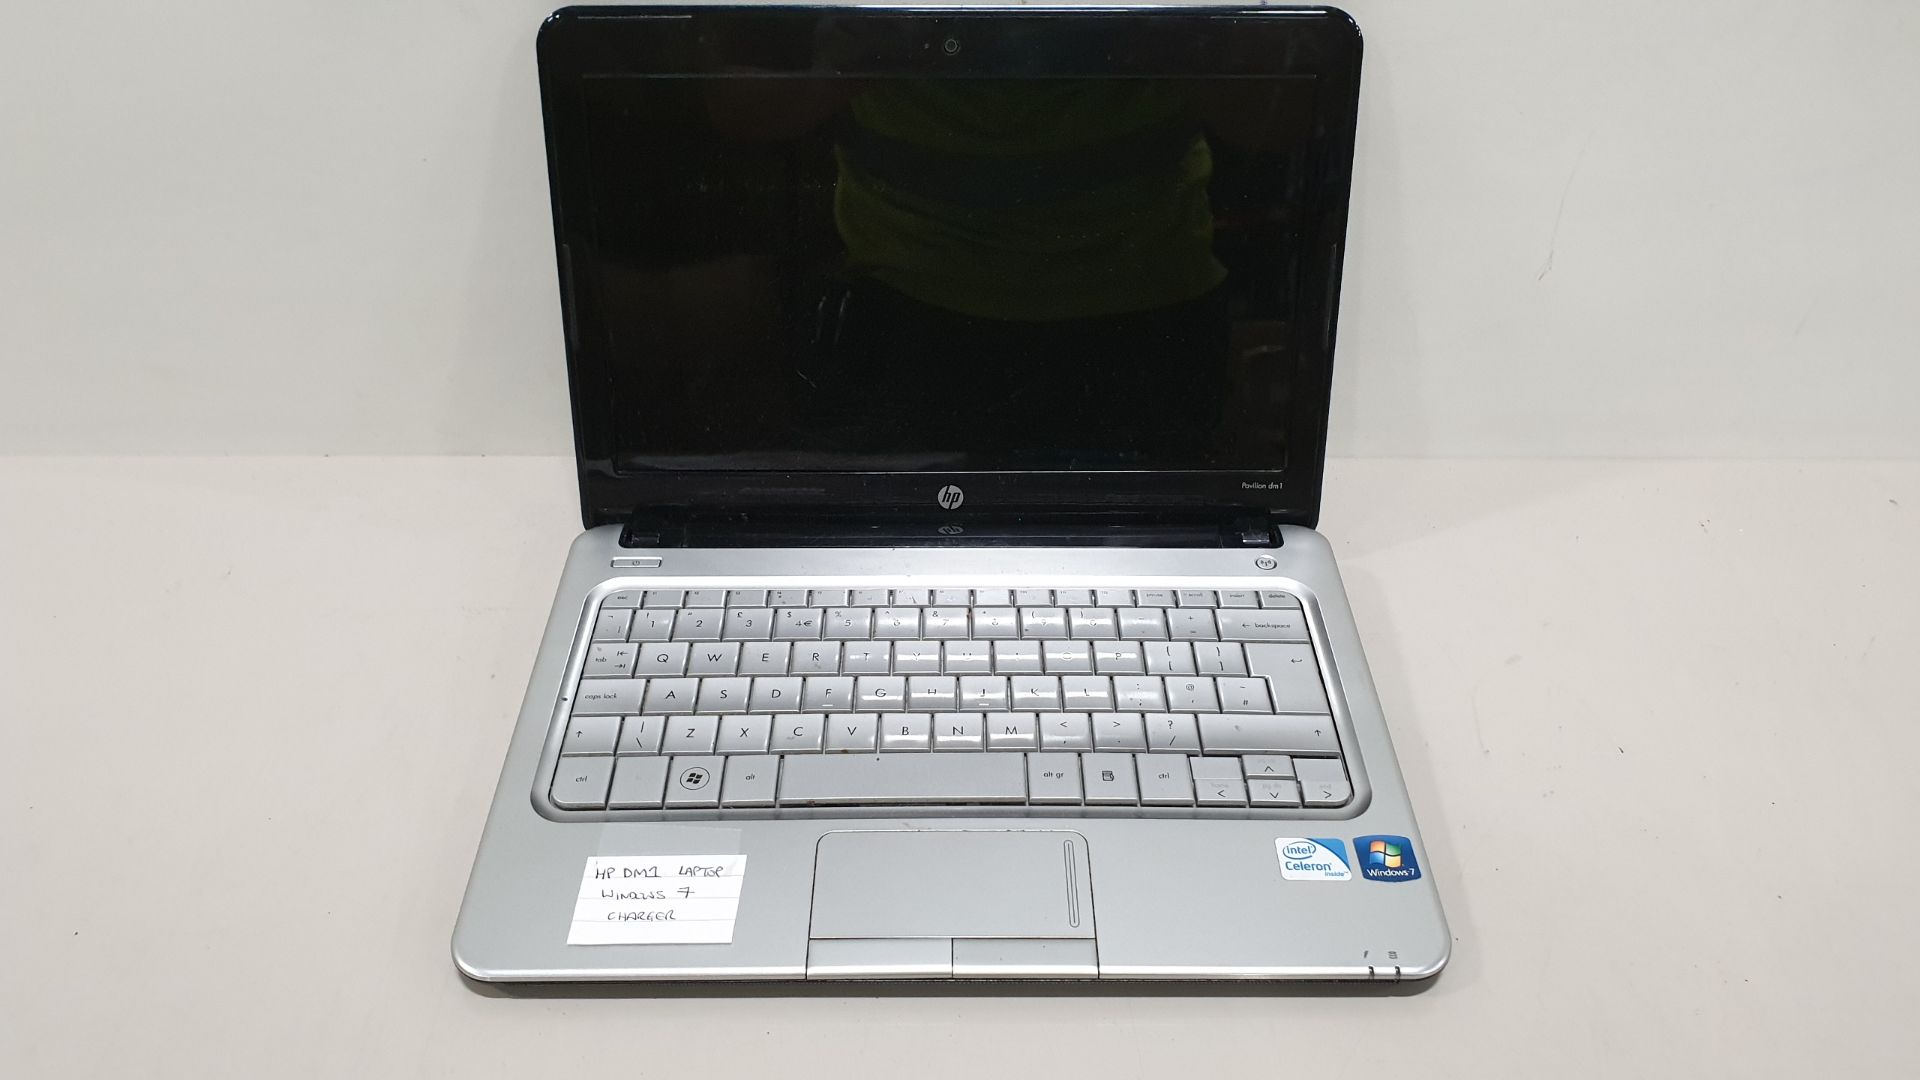 HP DM1 LAPTOP WINDOWS 7 - WITH CHARGER